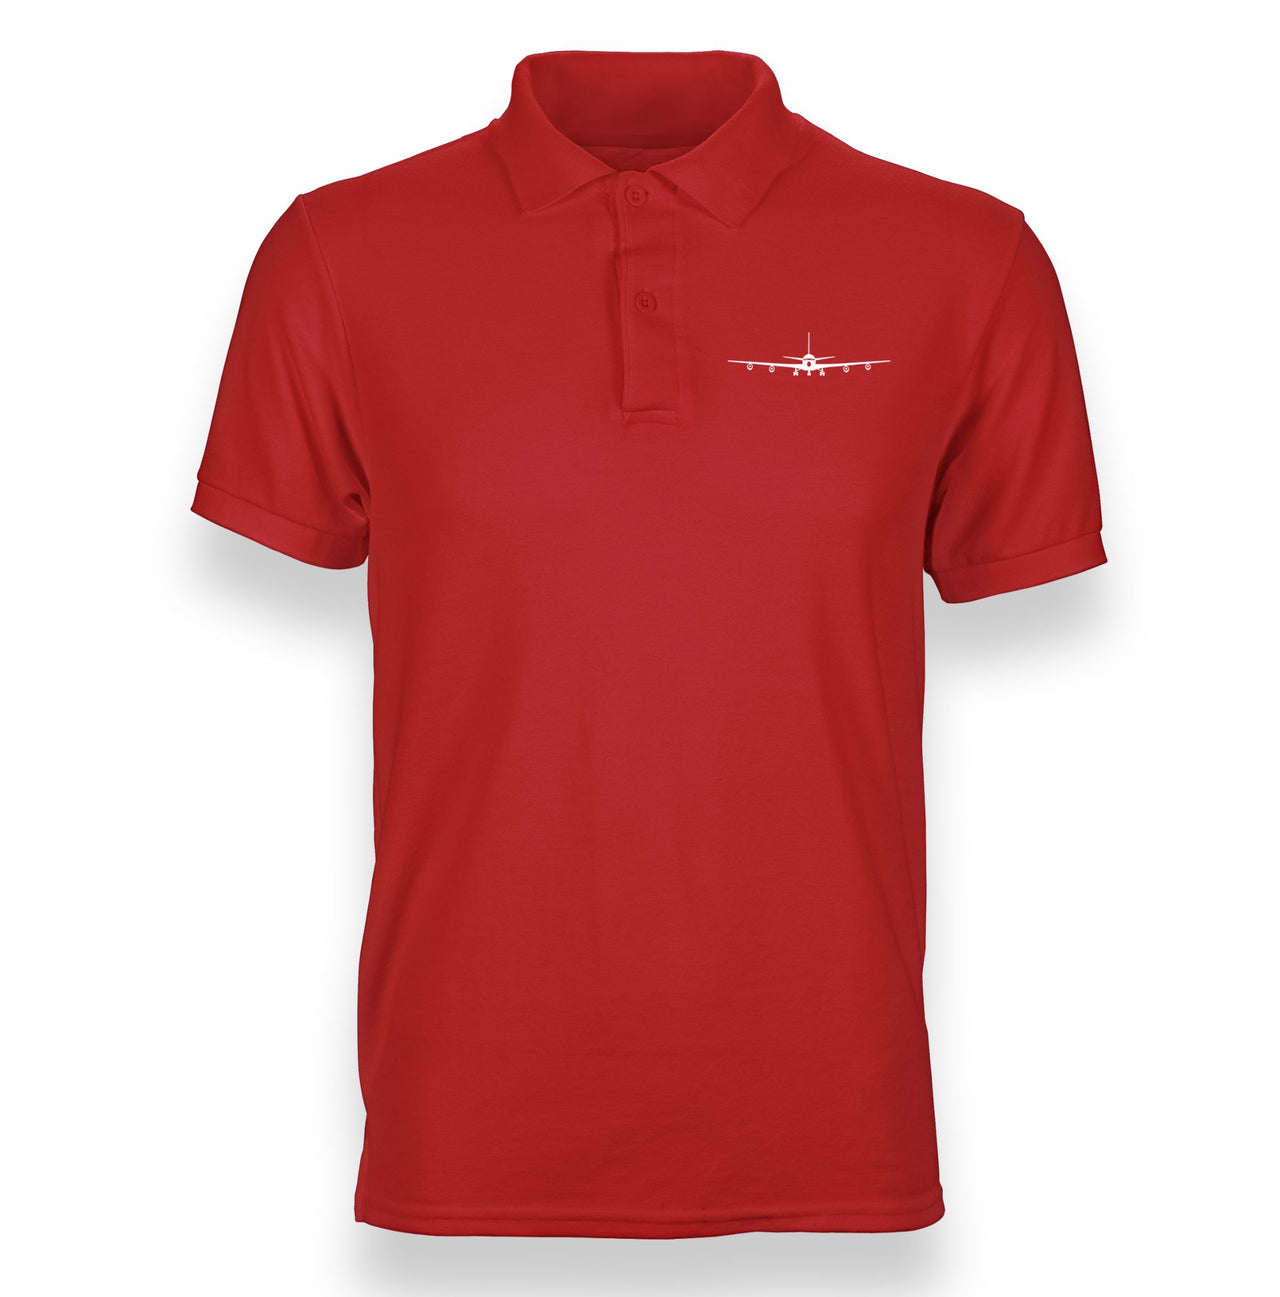 Boeing 707 Silhouette Designed "WOMEN" Polo T-Shirts